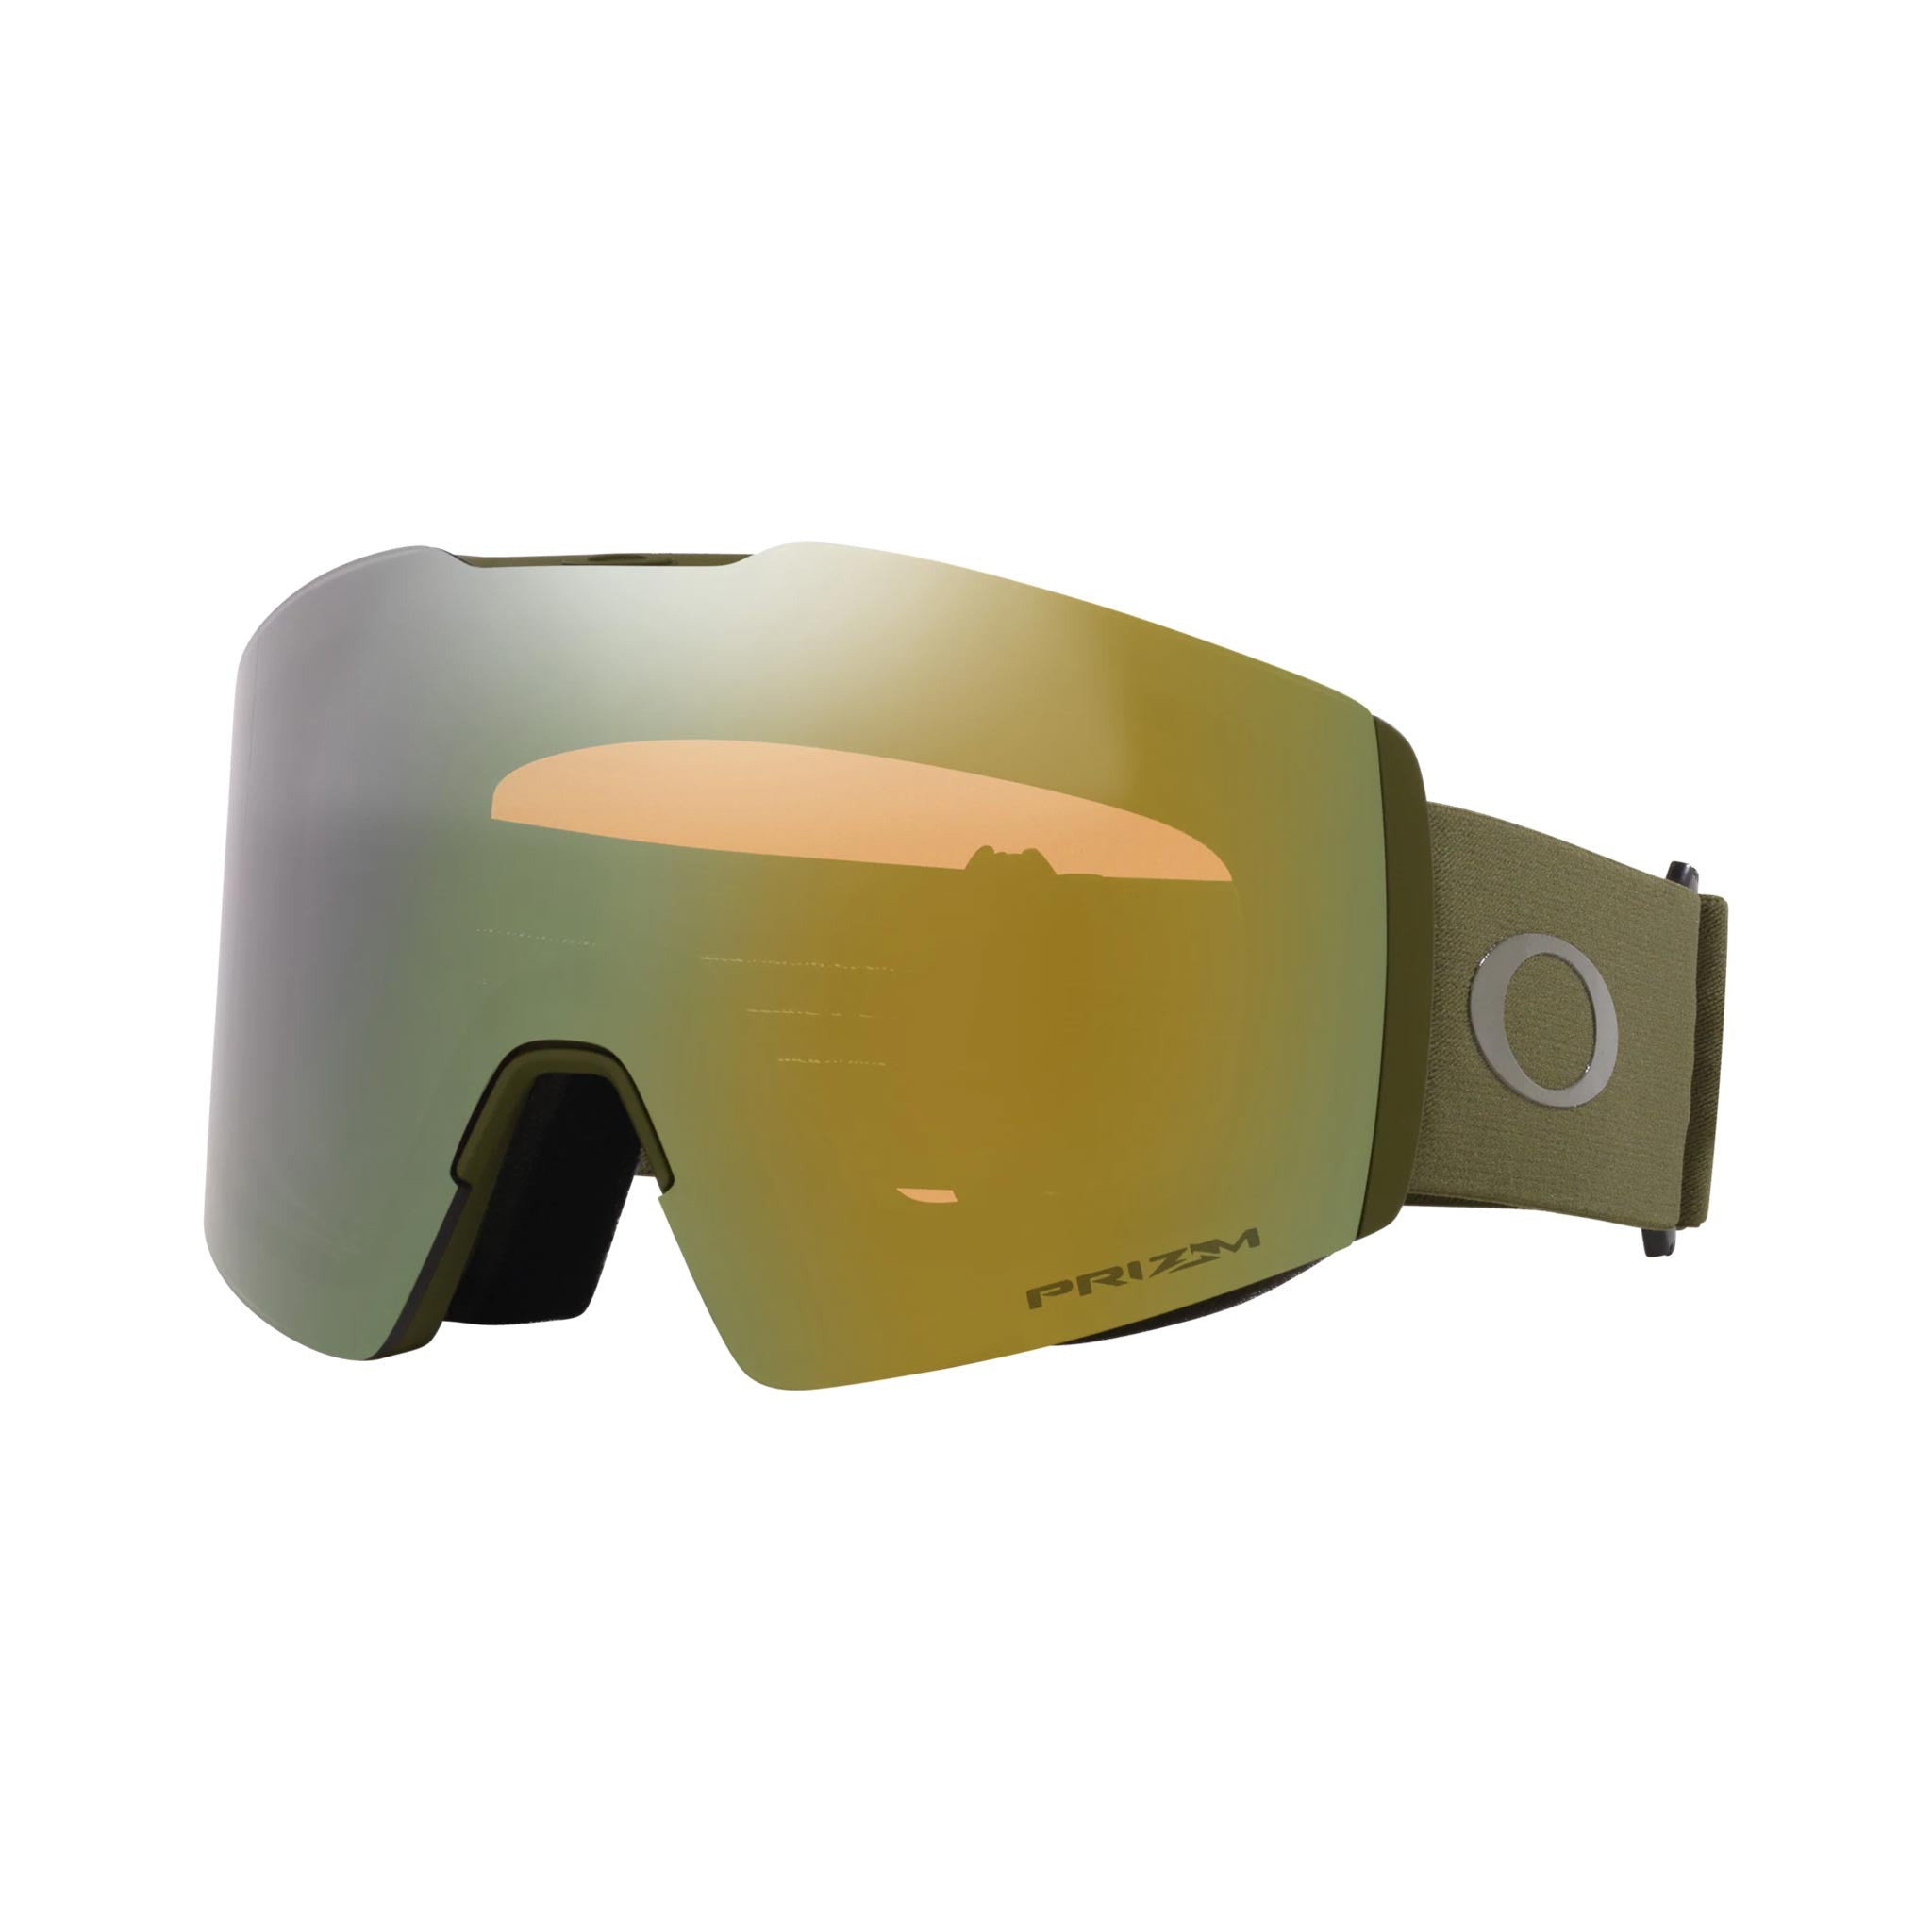 Fall Line L Snow Goggles in Sage Gold